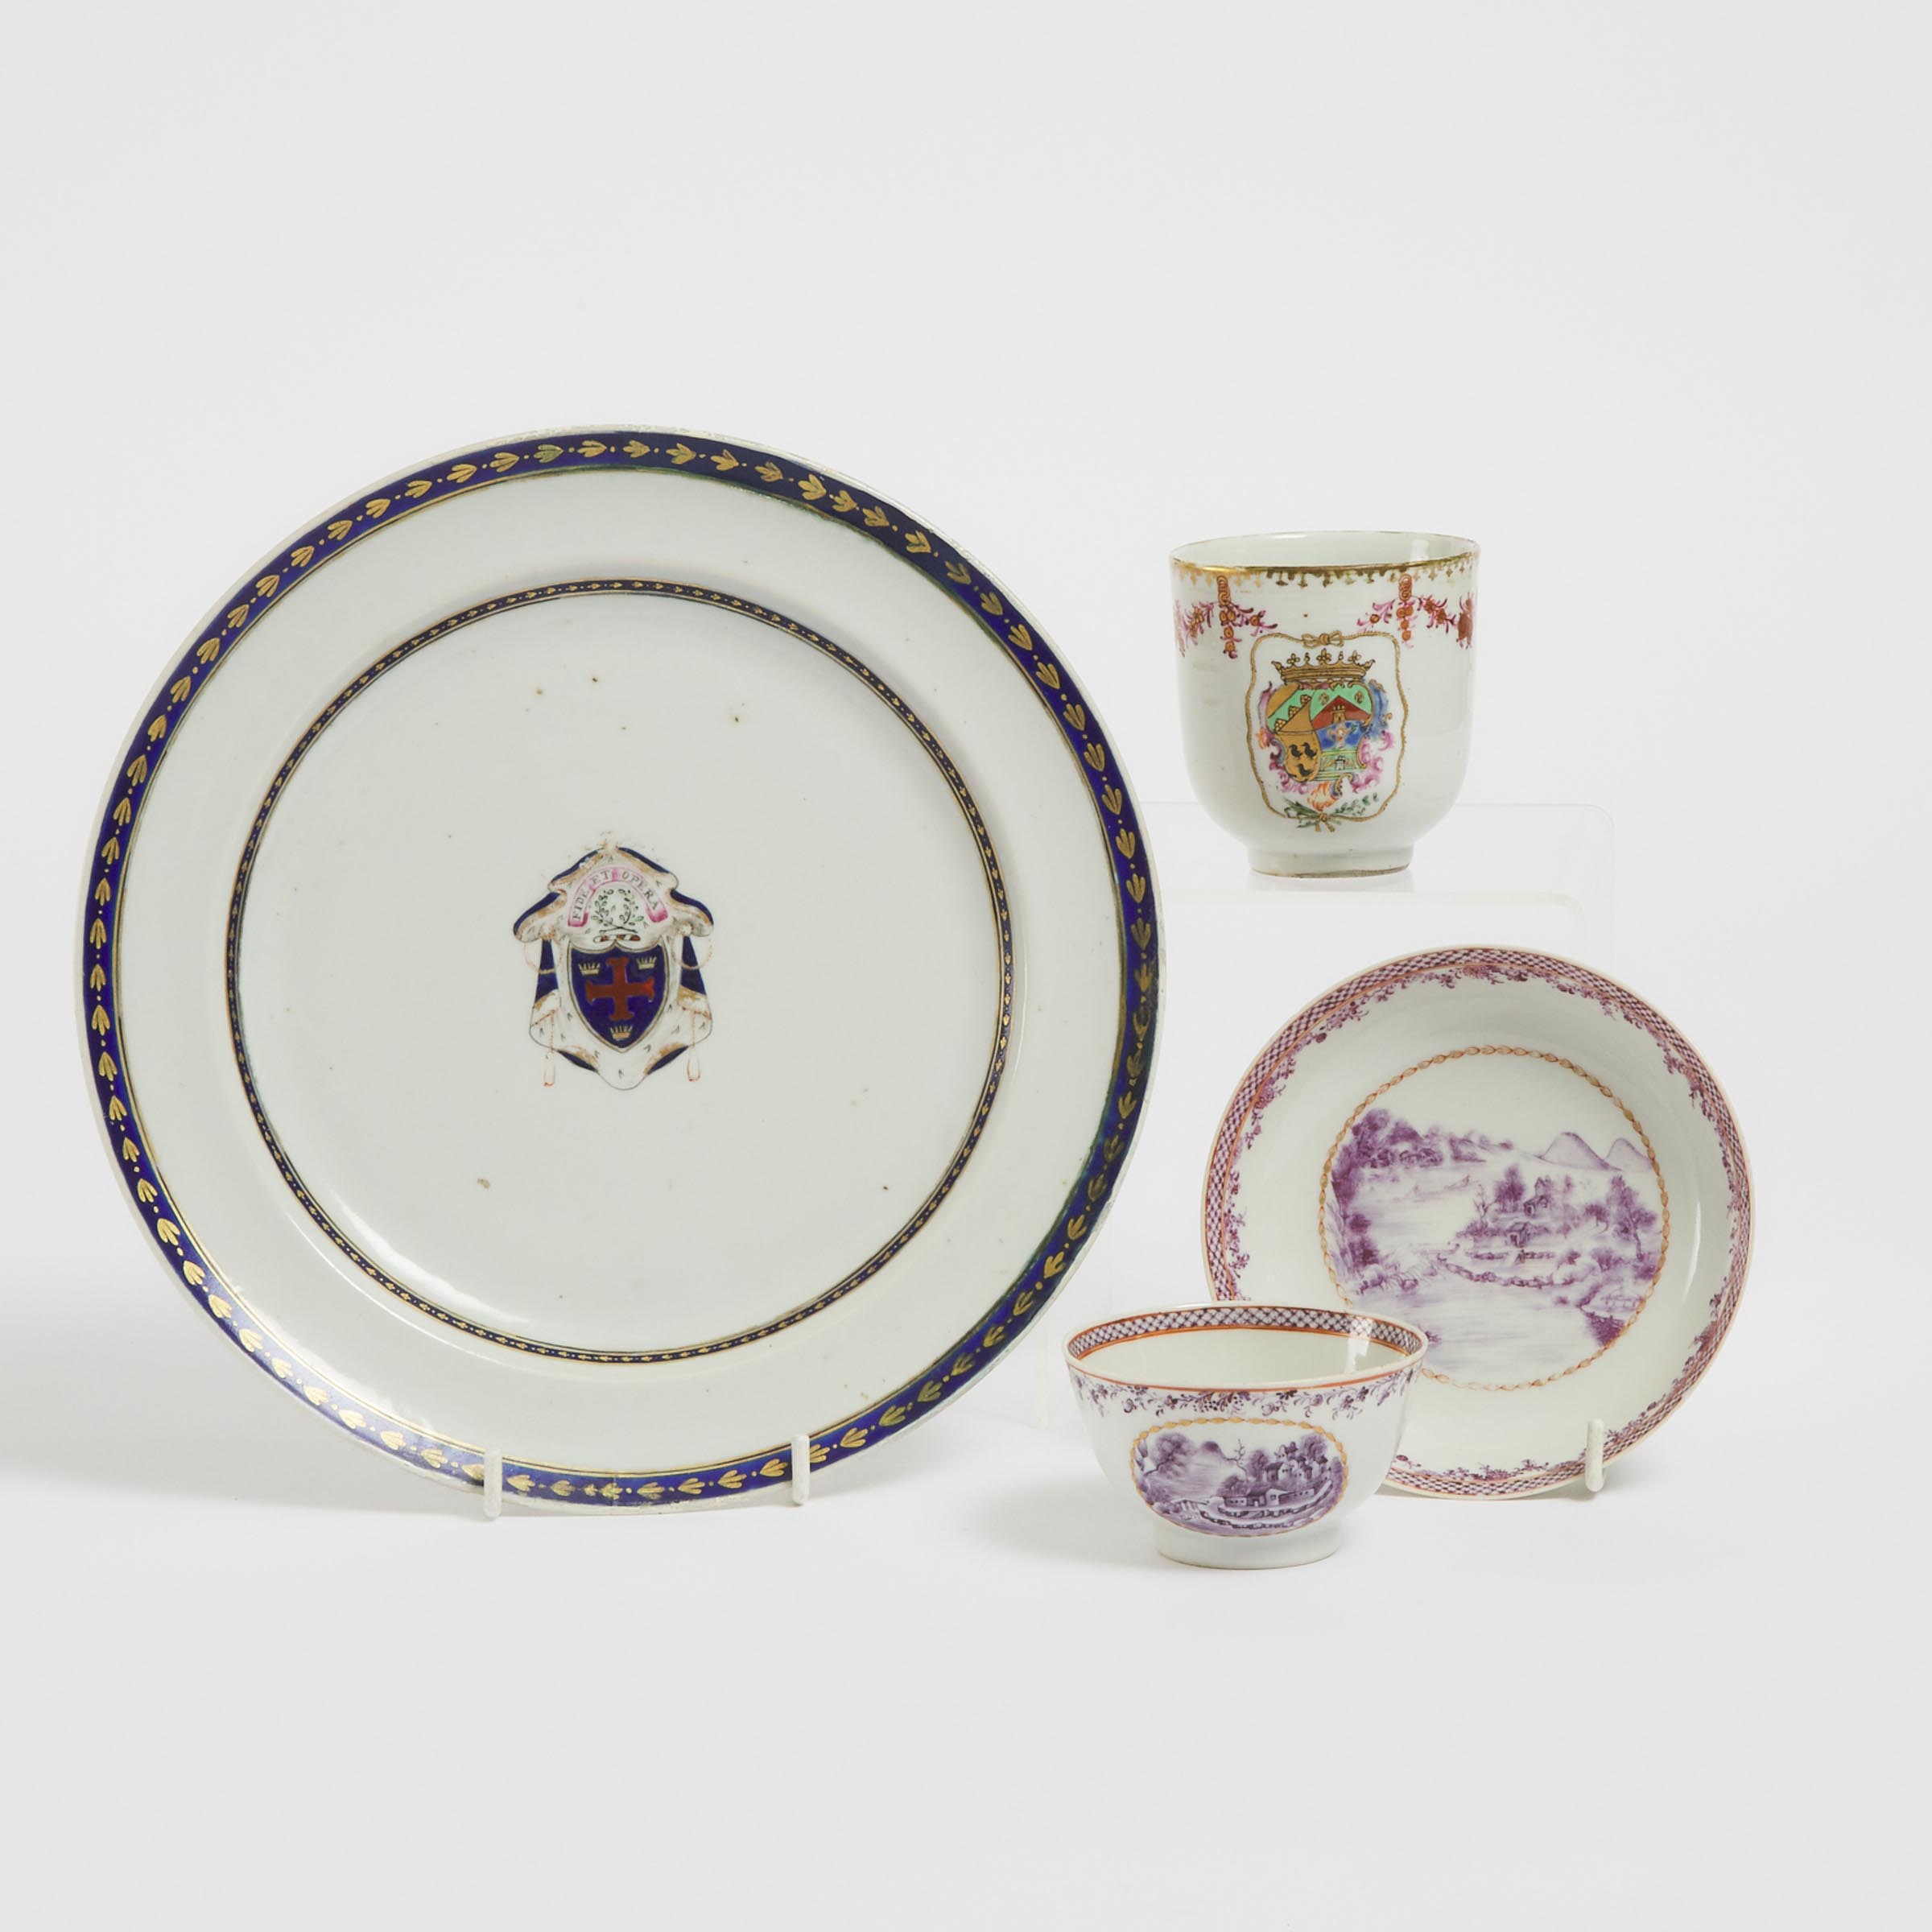 A Chinese Export Armorial Plate, M'Arthur, Circa 1795, together with an Armorial Teacup and a Cup and Saucer, Qianlong Period, 18th Century